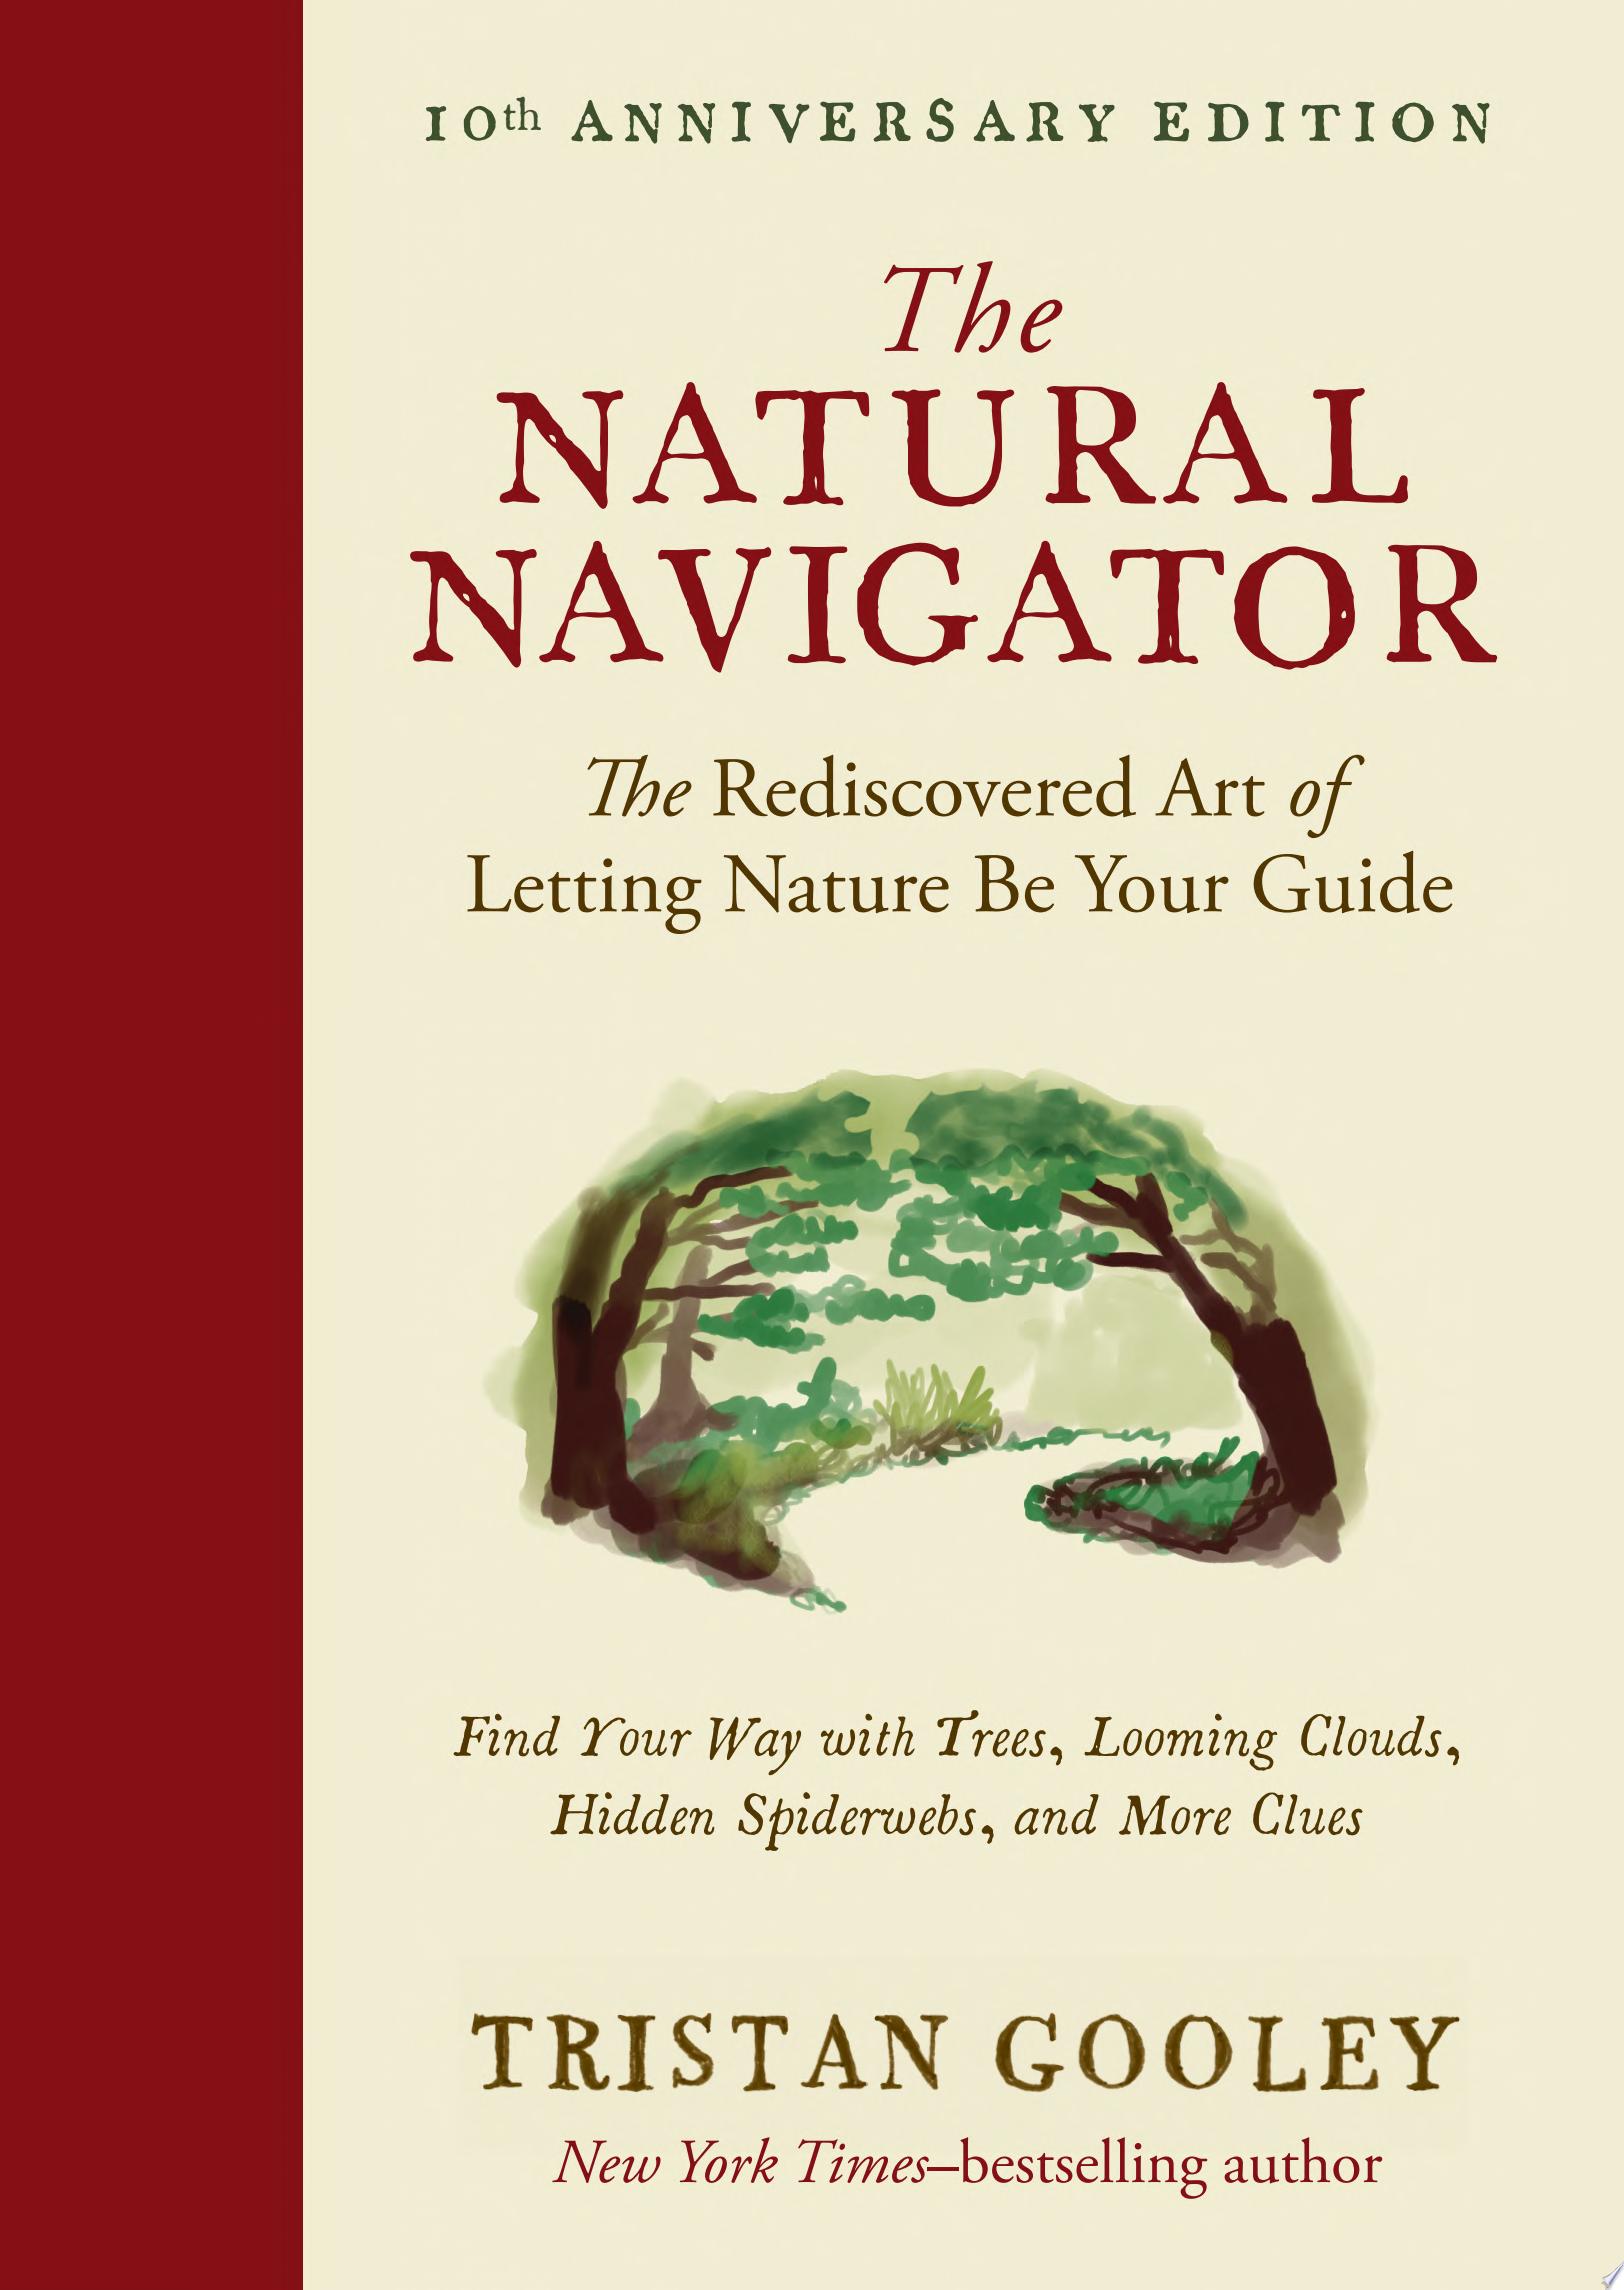 Image for "The Natural Navigator, Tenth Anniversary Edition"